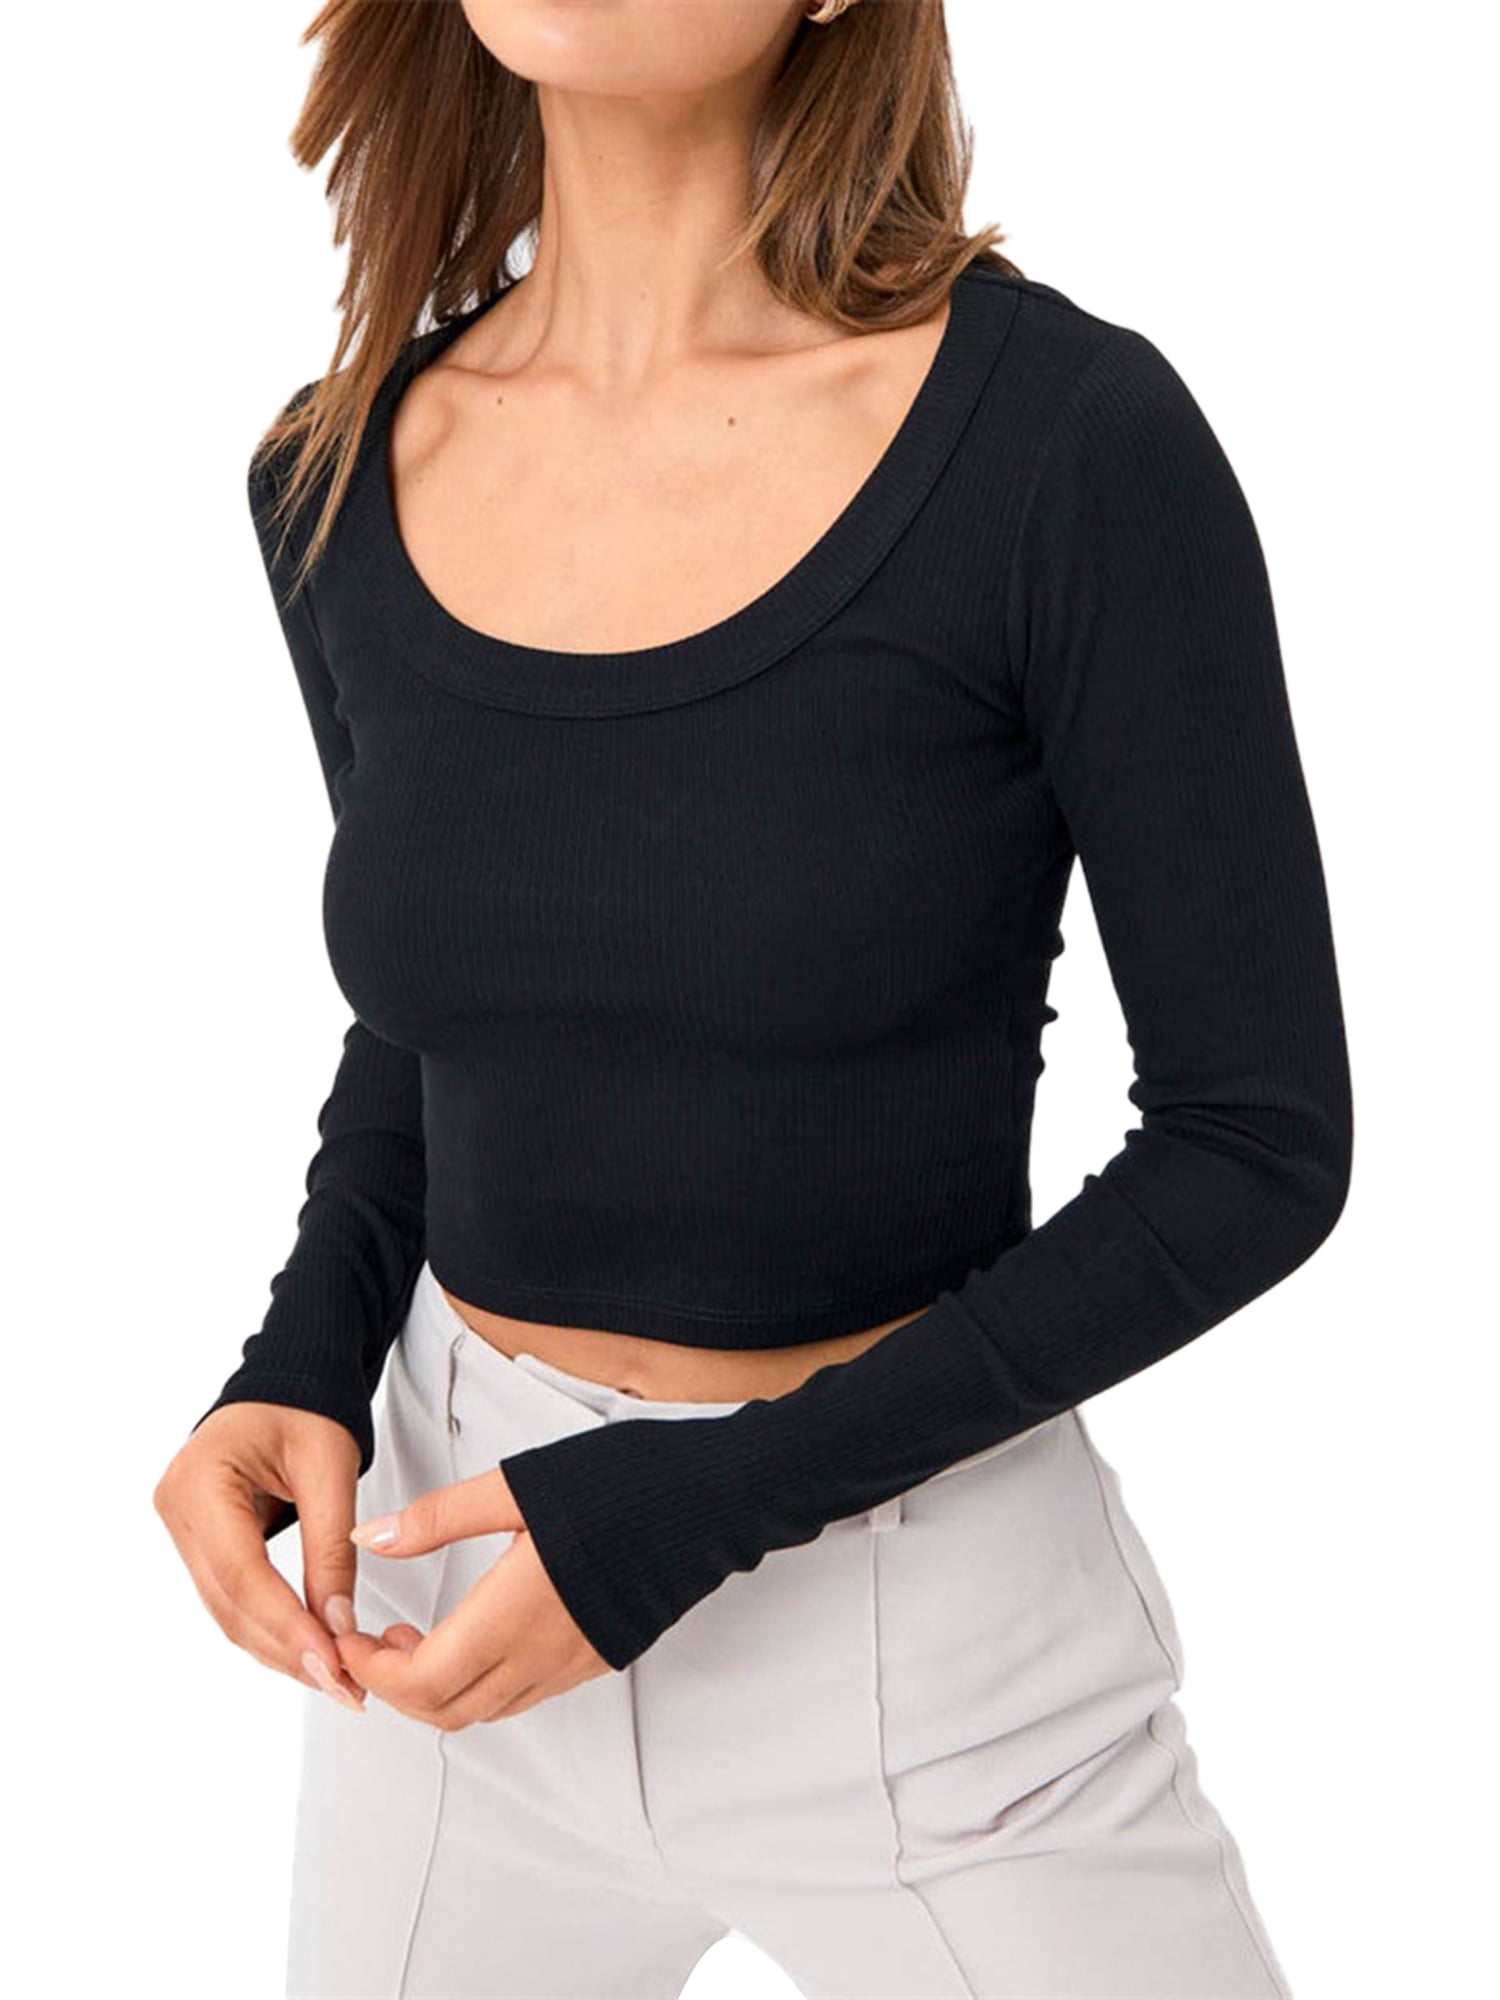 BOOSOULY Women's Basic Square Neck Crop Top Long Sleeve Slim Fit Cropped T Shirts  Black XS at  Women's Clothing store